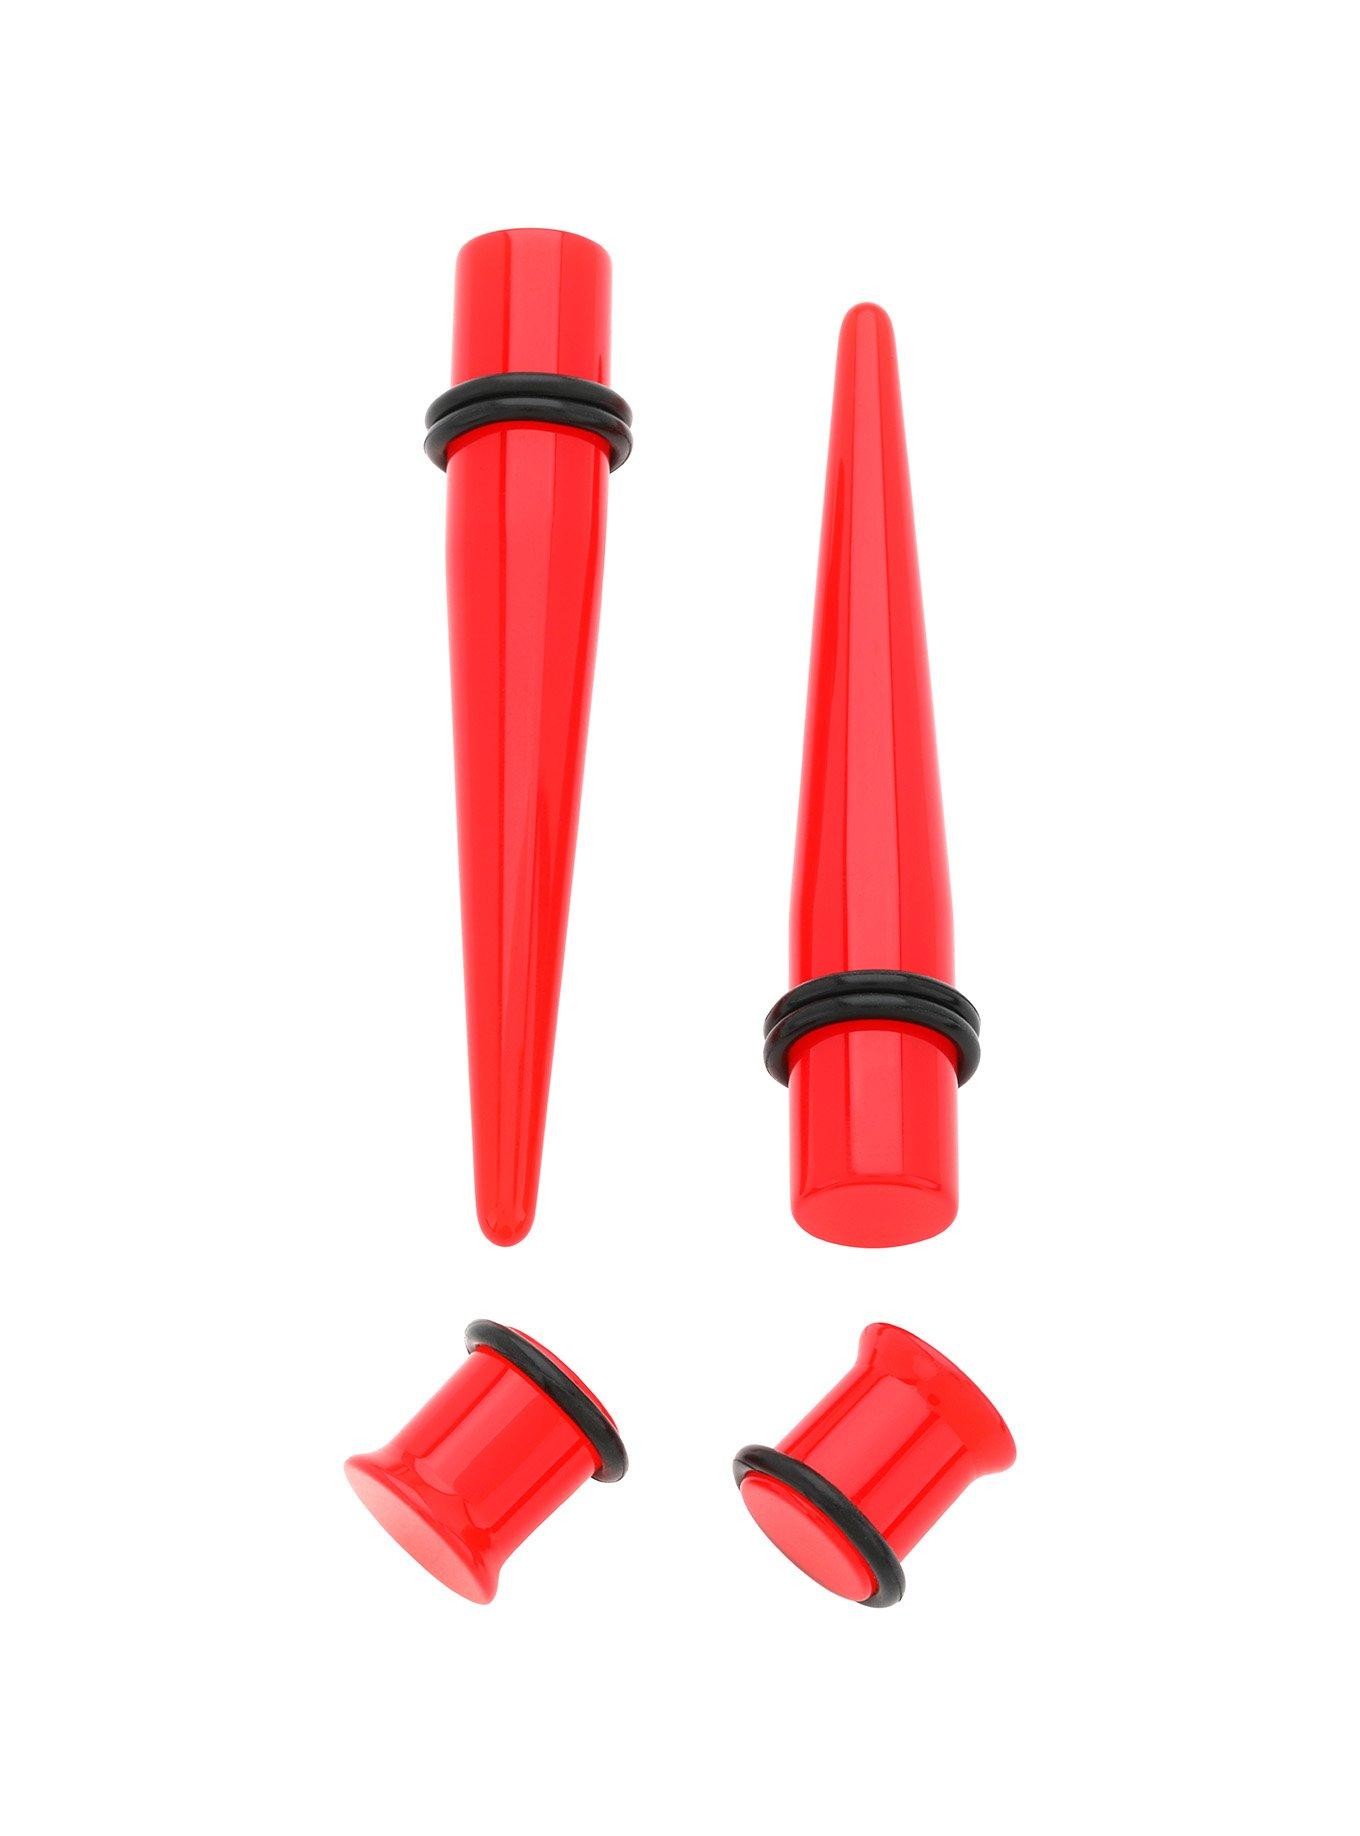 Acrylic Red Plug & Taper 4 Pack, RED, hi-res